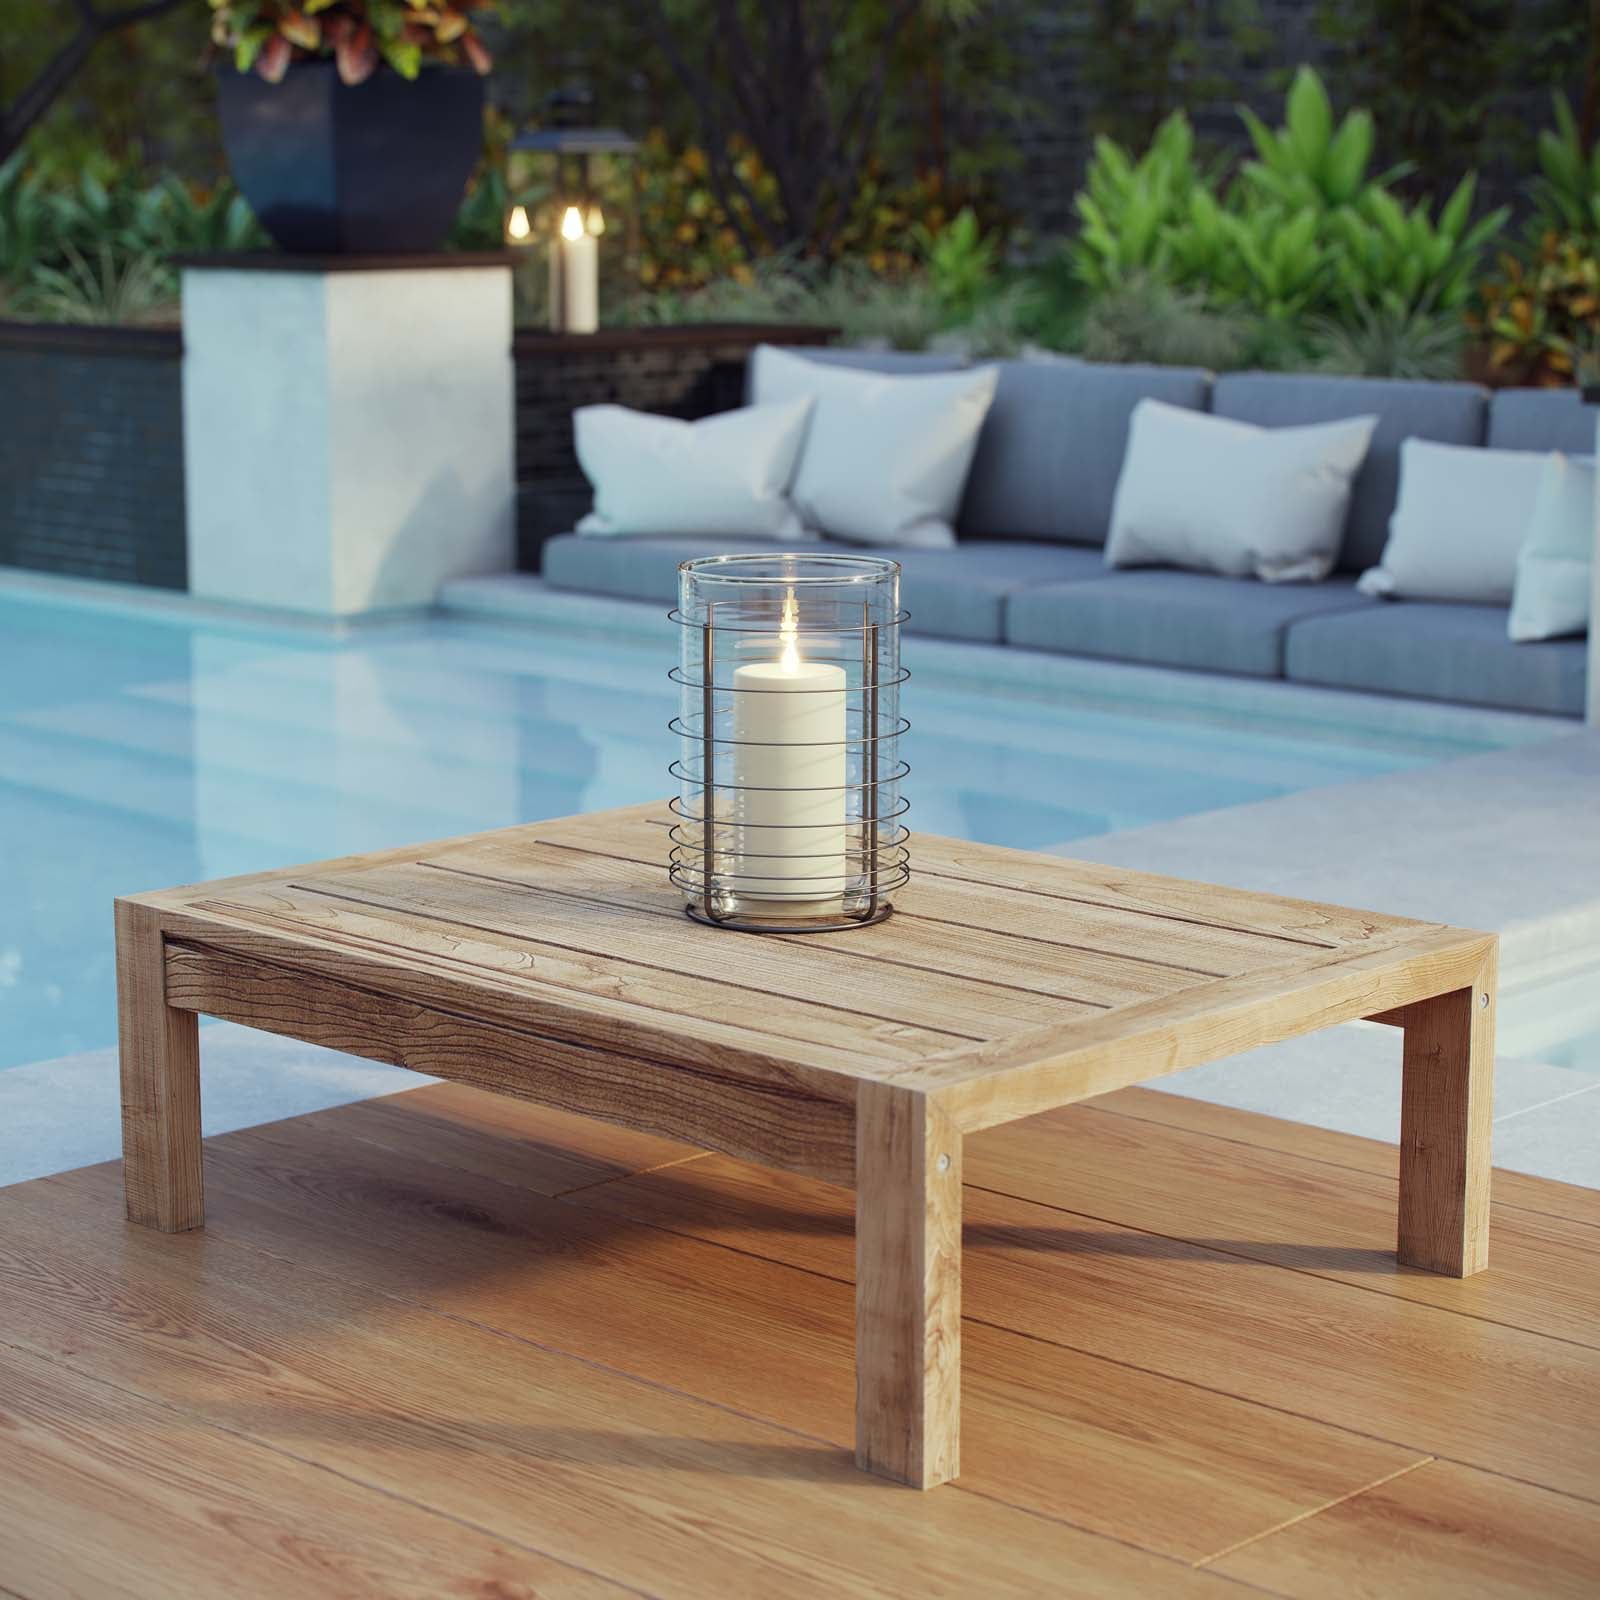 Modway Upland Outdoor Patio Wood Coffee Table In Natural – Walmart Pertaining To Natural Outdoor Cocktail Tables (View 15 of 15)